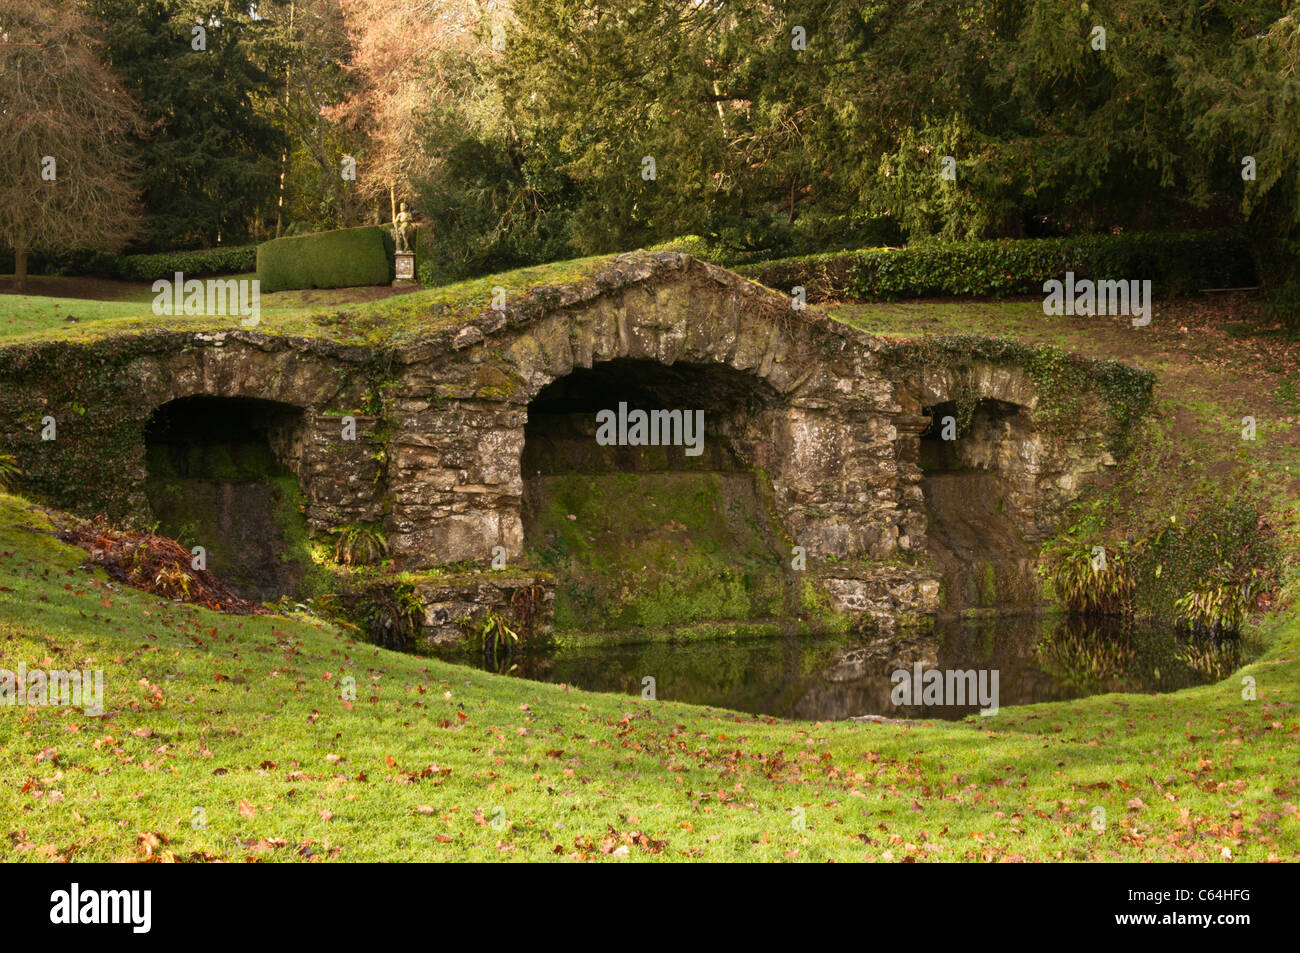 The rustic stone arches of the lower cascade within the Venus Vale of Rousham House gardens, Oxfordshire, England Stock Photo